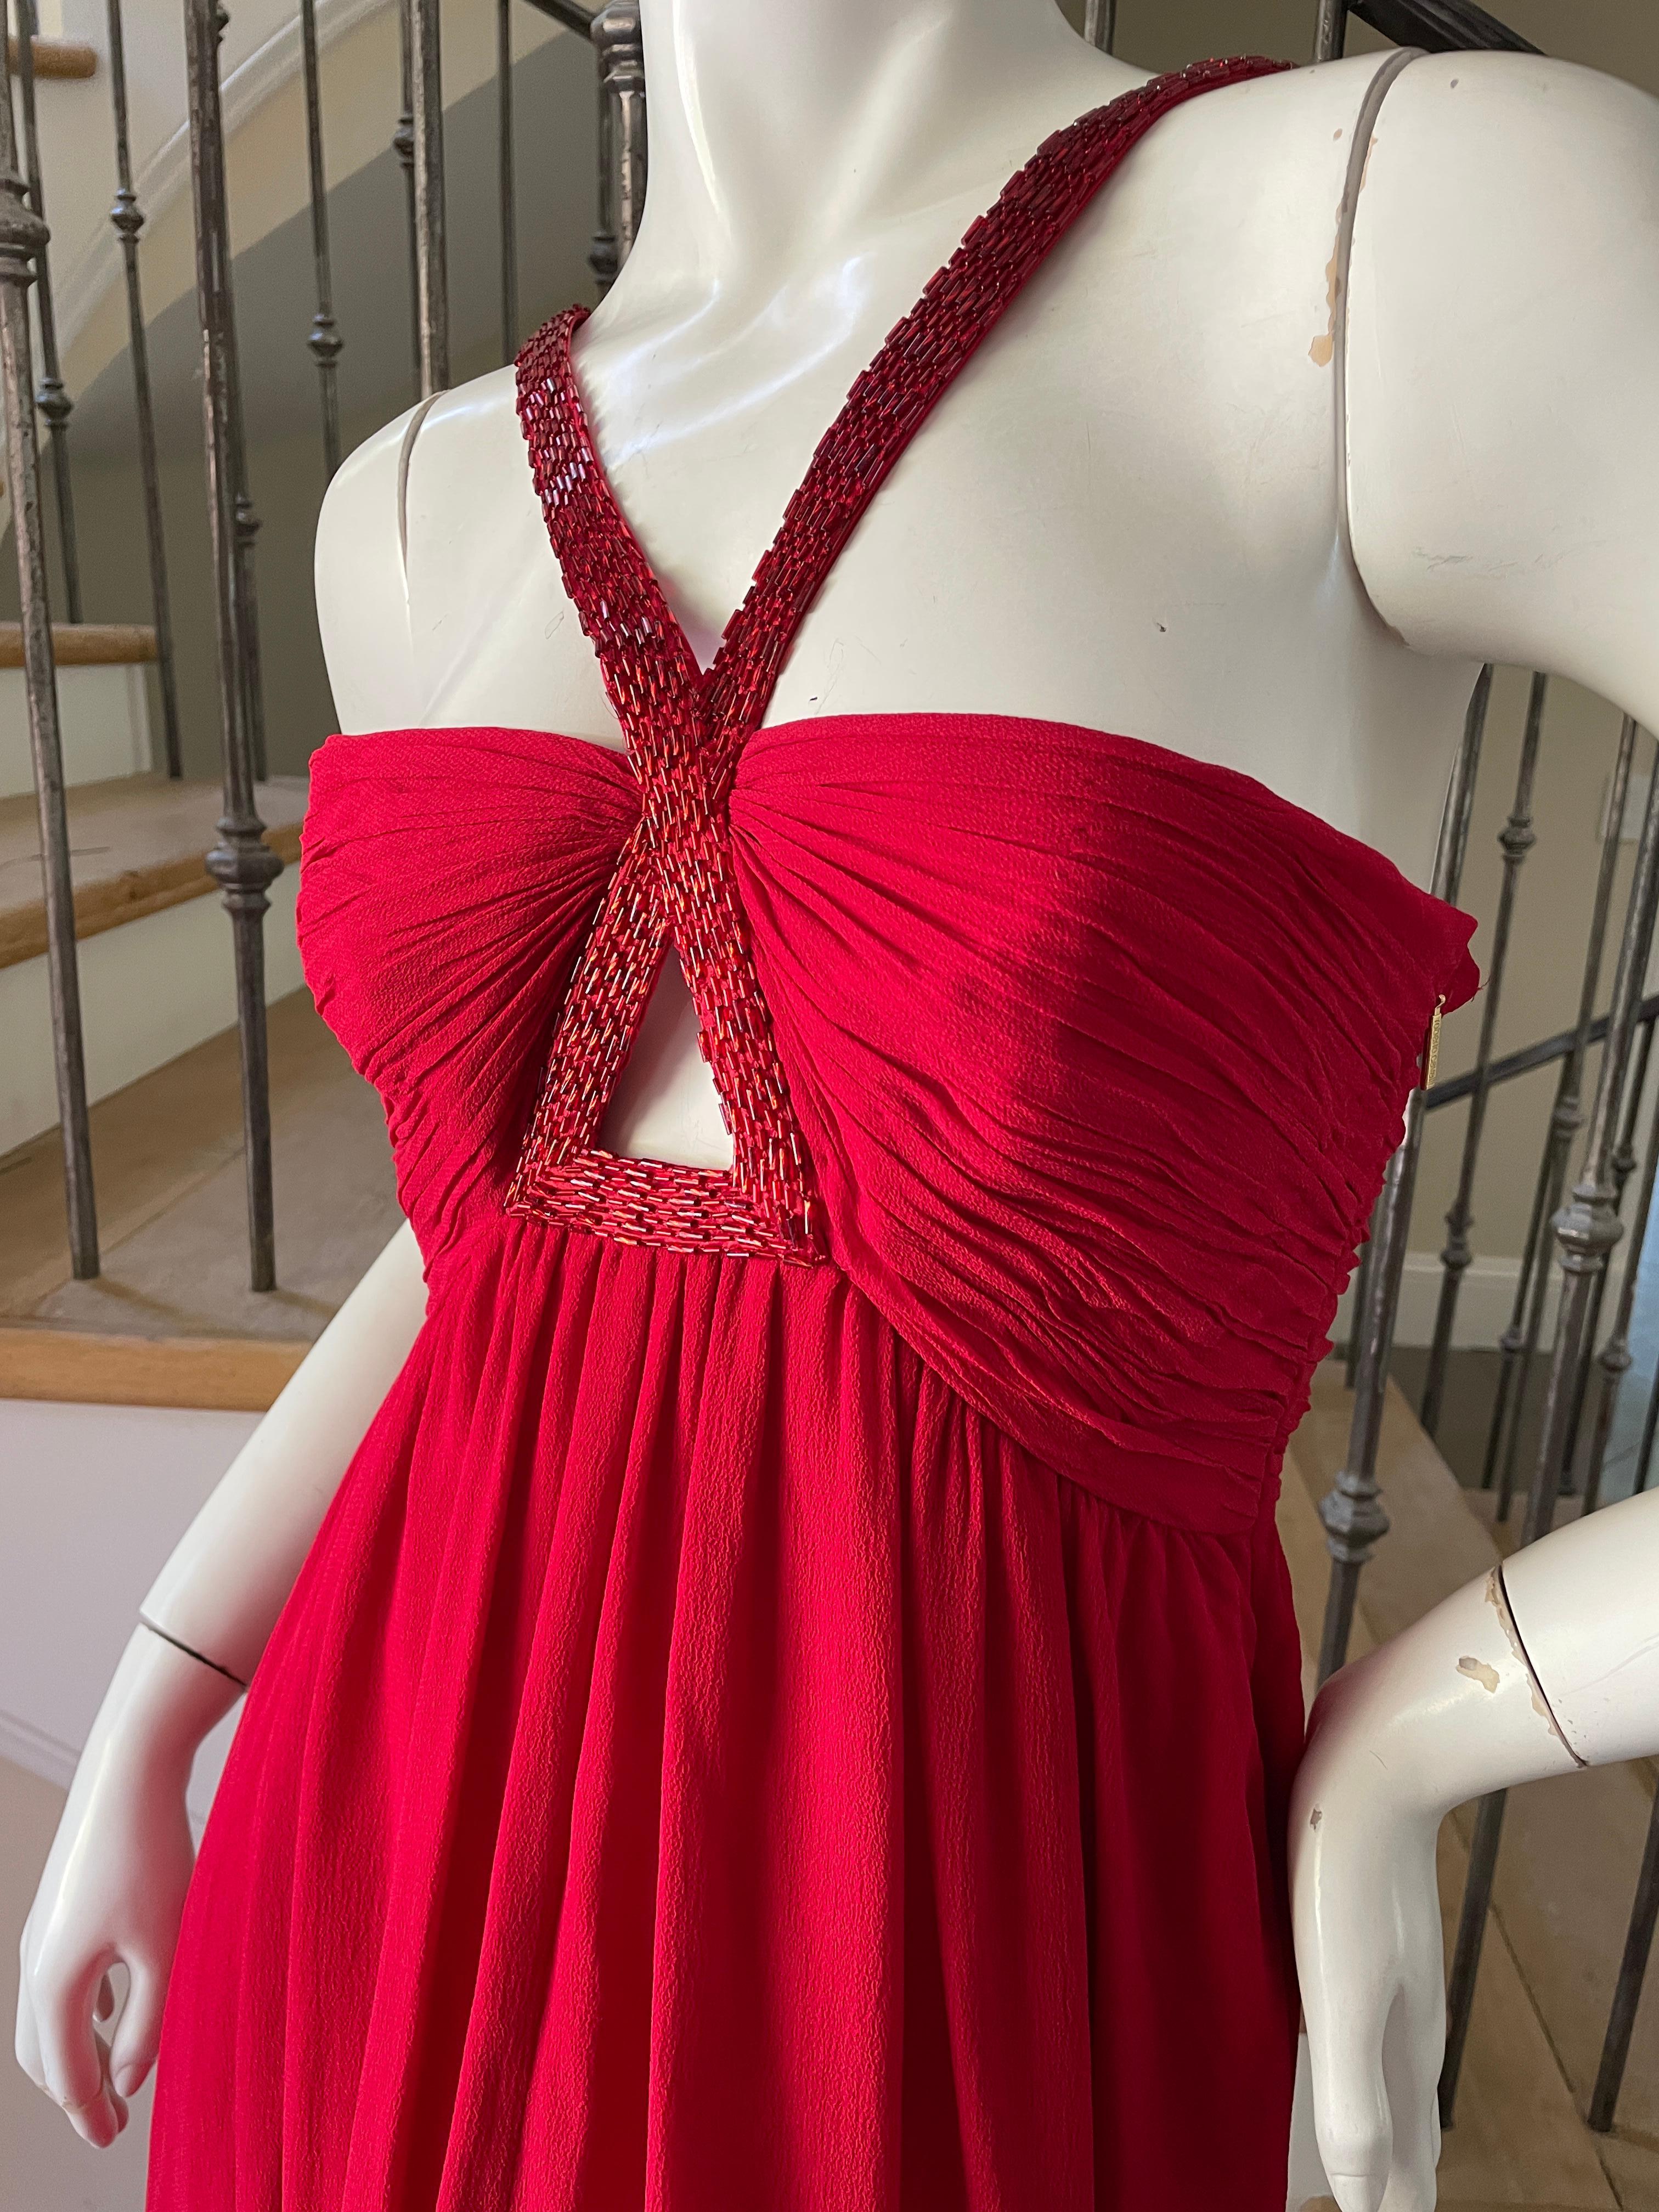 Women's Roberto Cavalli Vintage Coral Red Silk Evening Dress with Keyhole Beaded Details For Sale